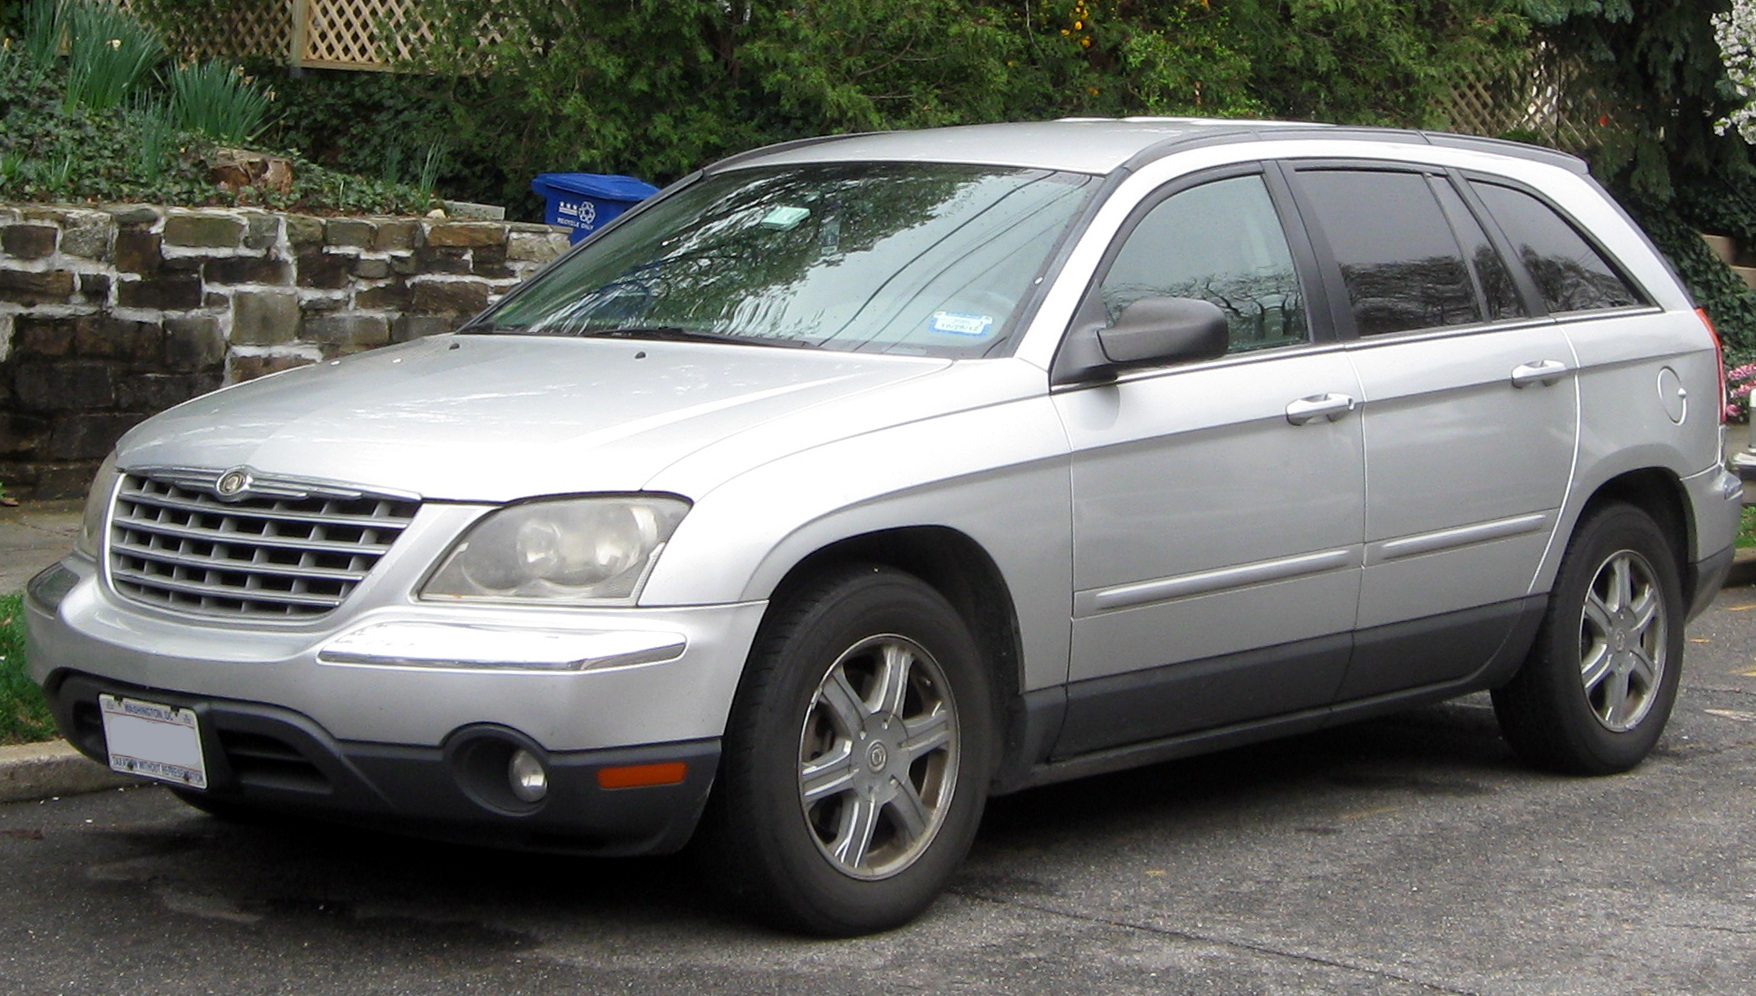 Chrysler Pacifica (crossover) - Wikipedia